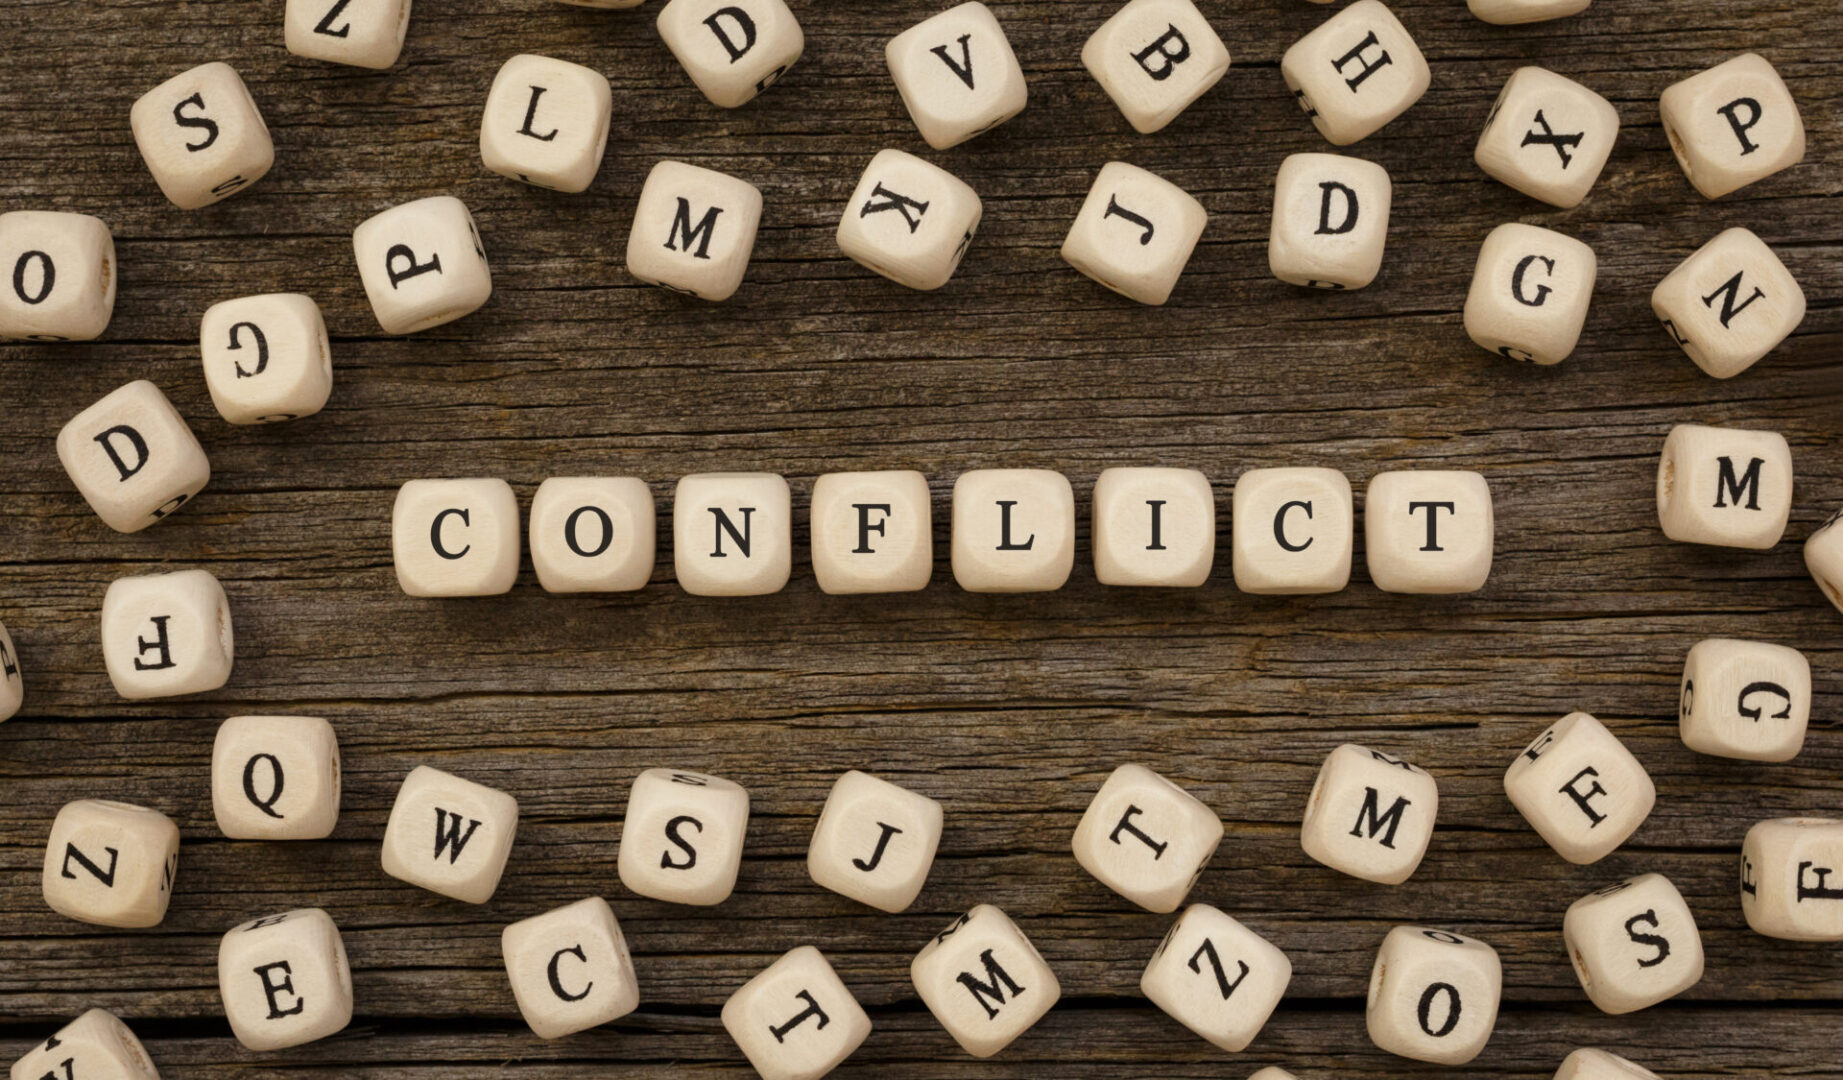 Word CONFLICT written on wood block,stock image